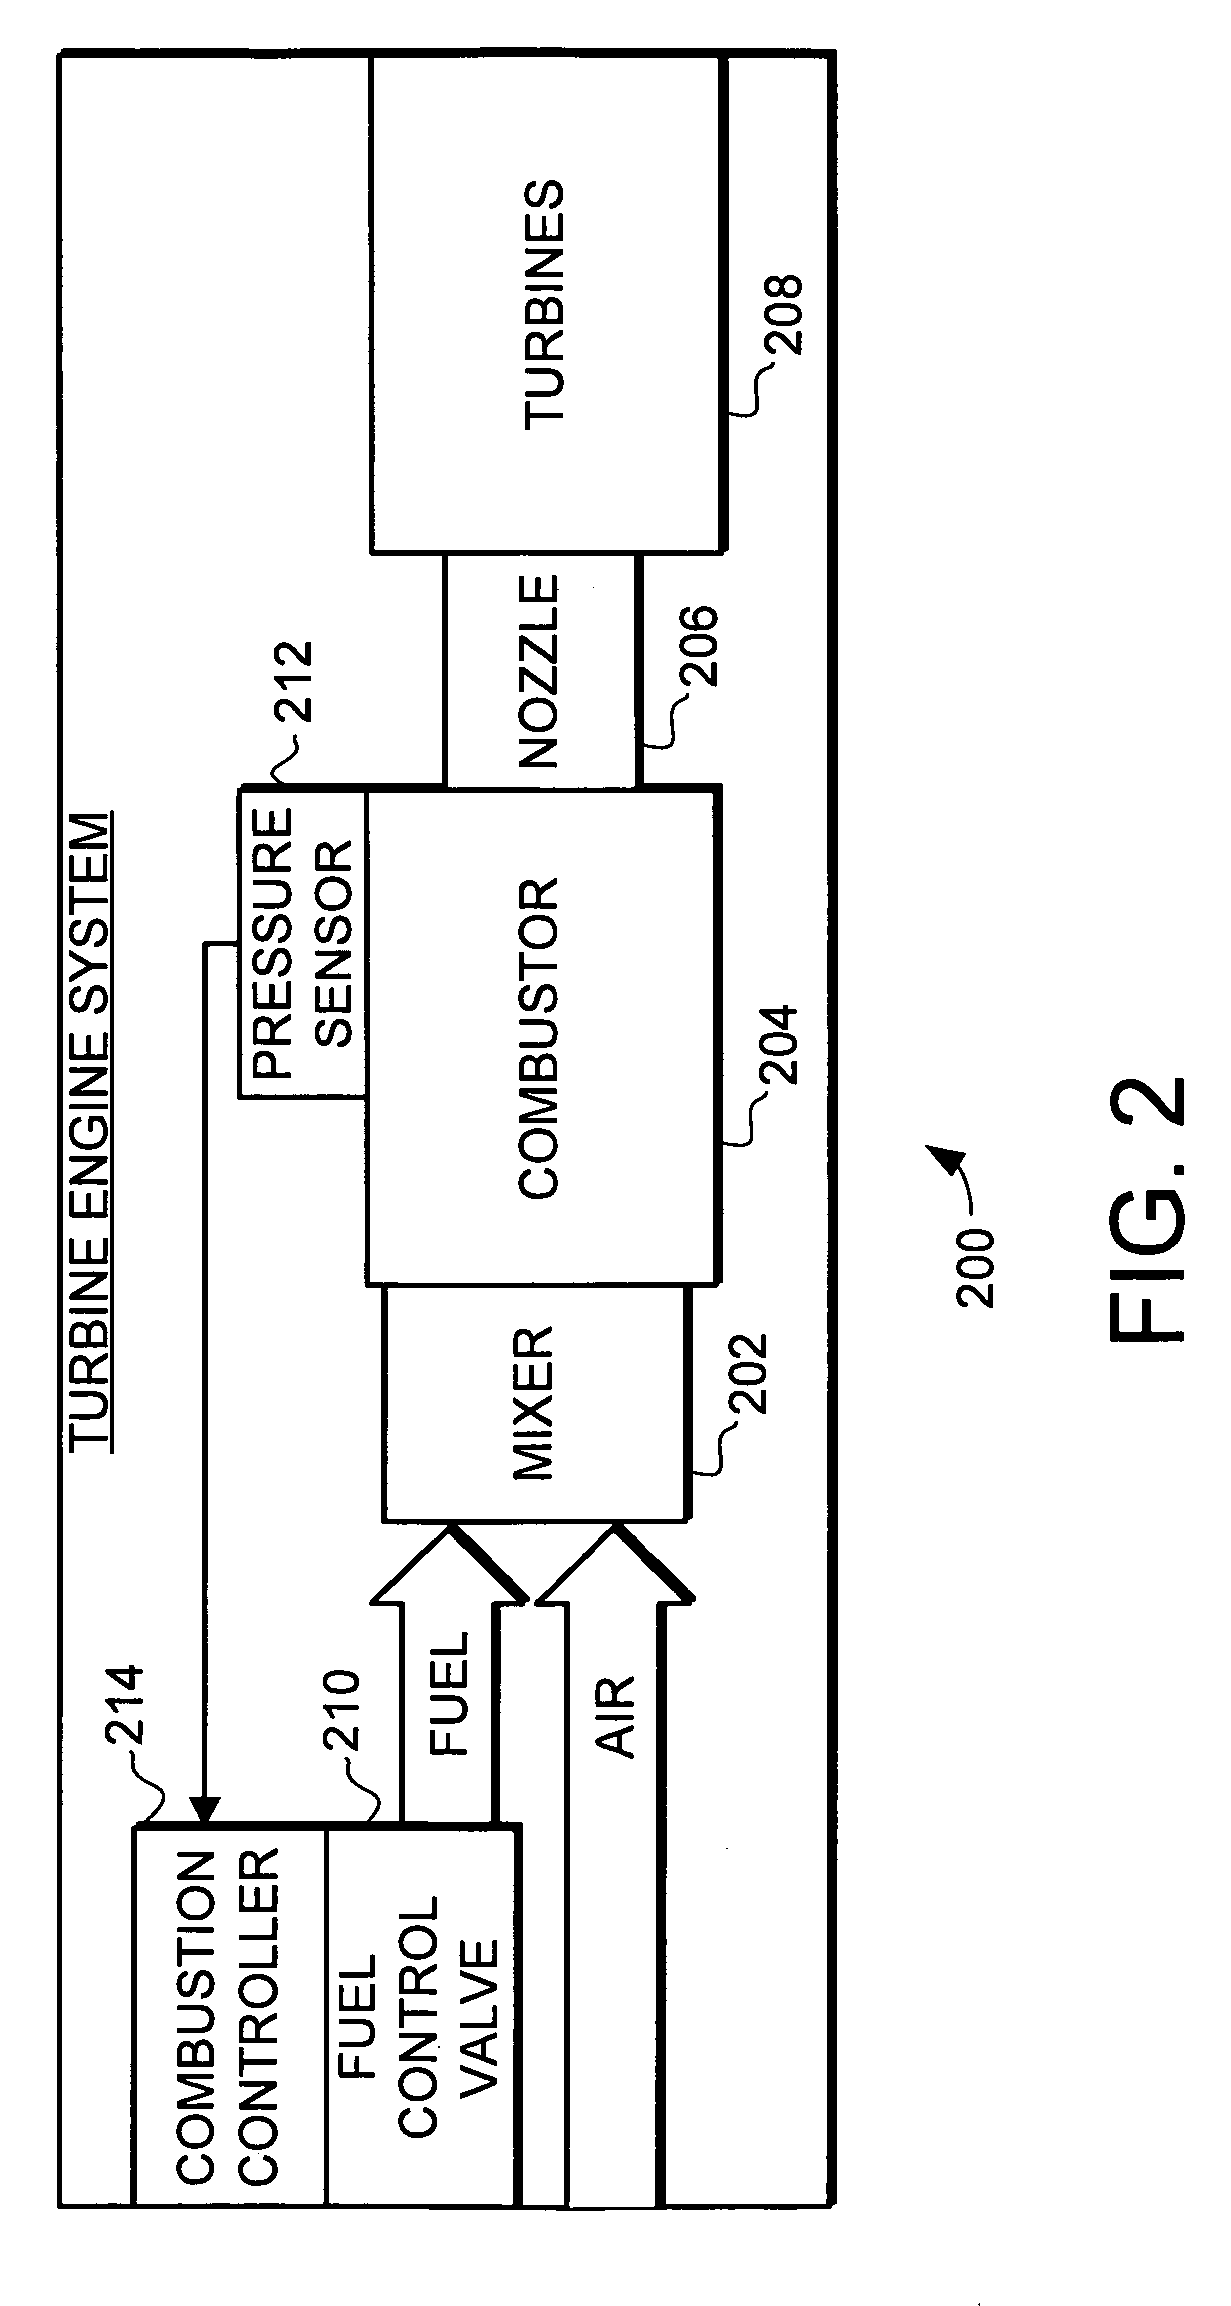 System and method for turbine engine adaptive control for mitigation of instabilities